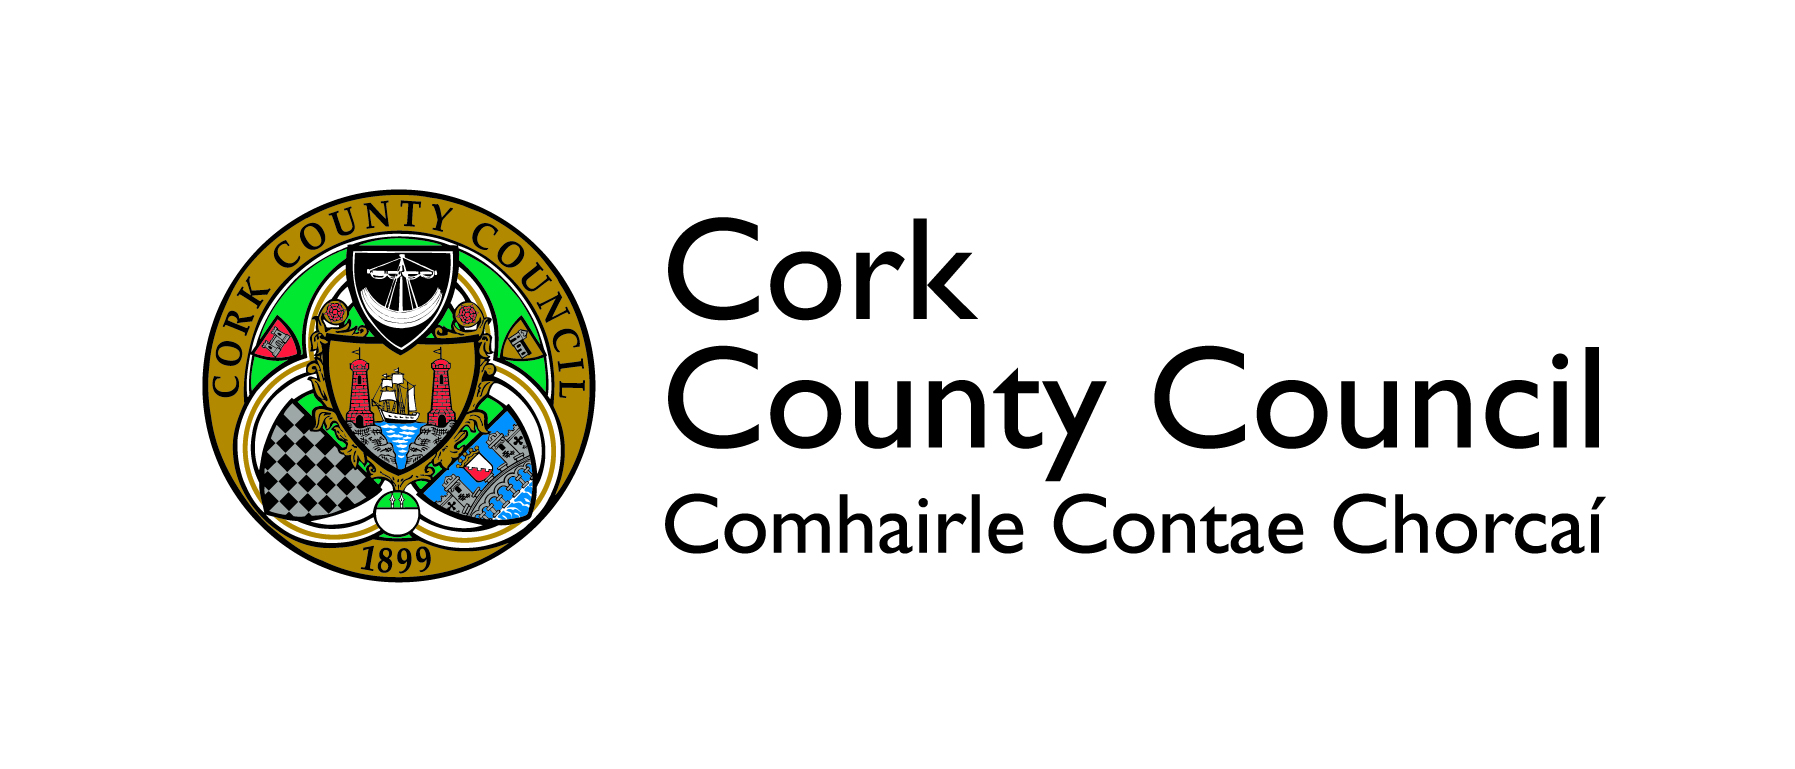 Cllr. O’ Shea welcomes increase in funding to Local & Regional Roads in Cork for 2019